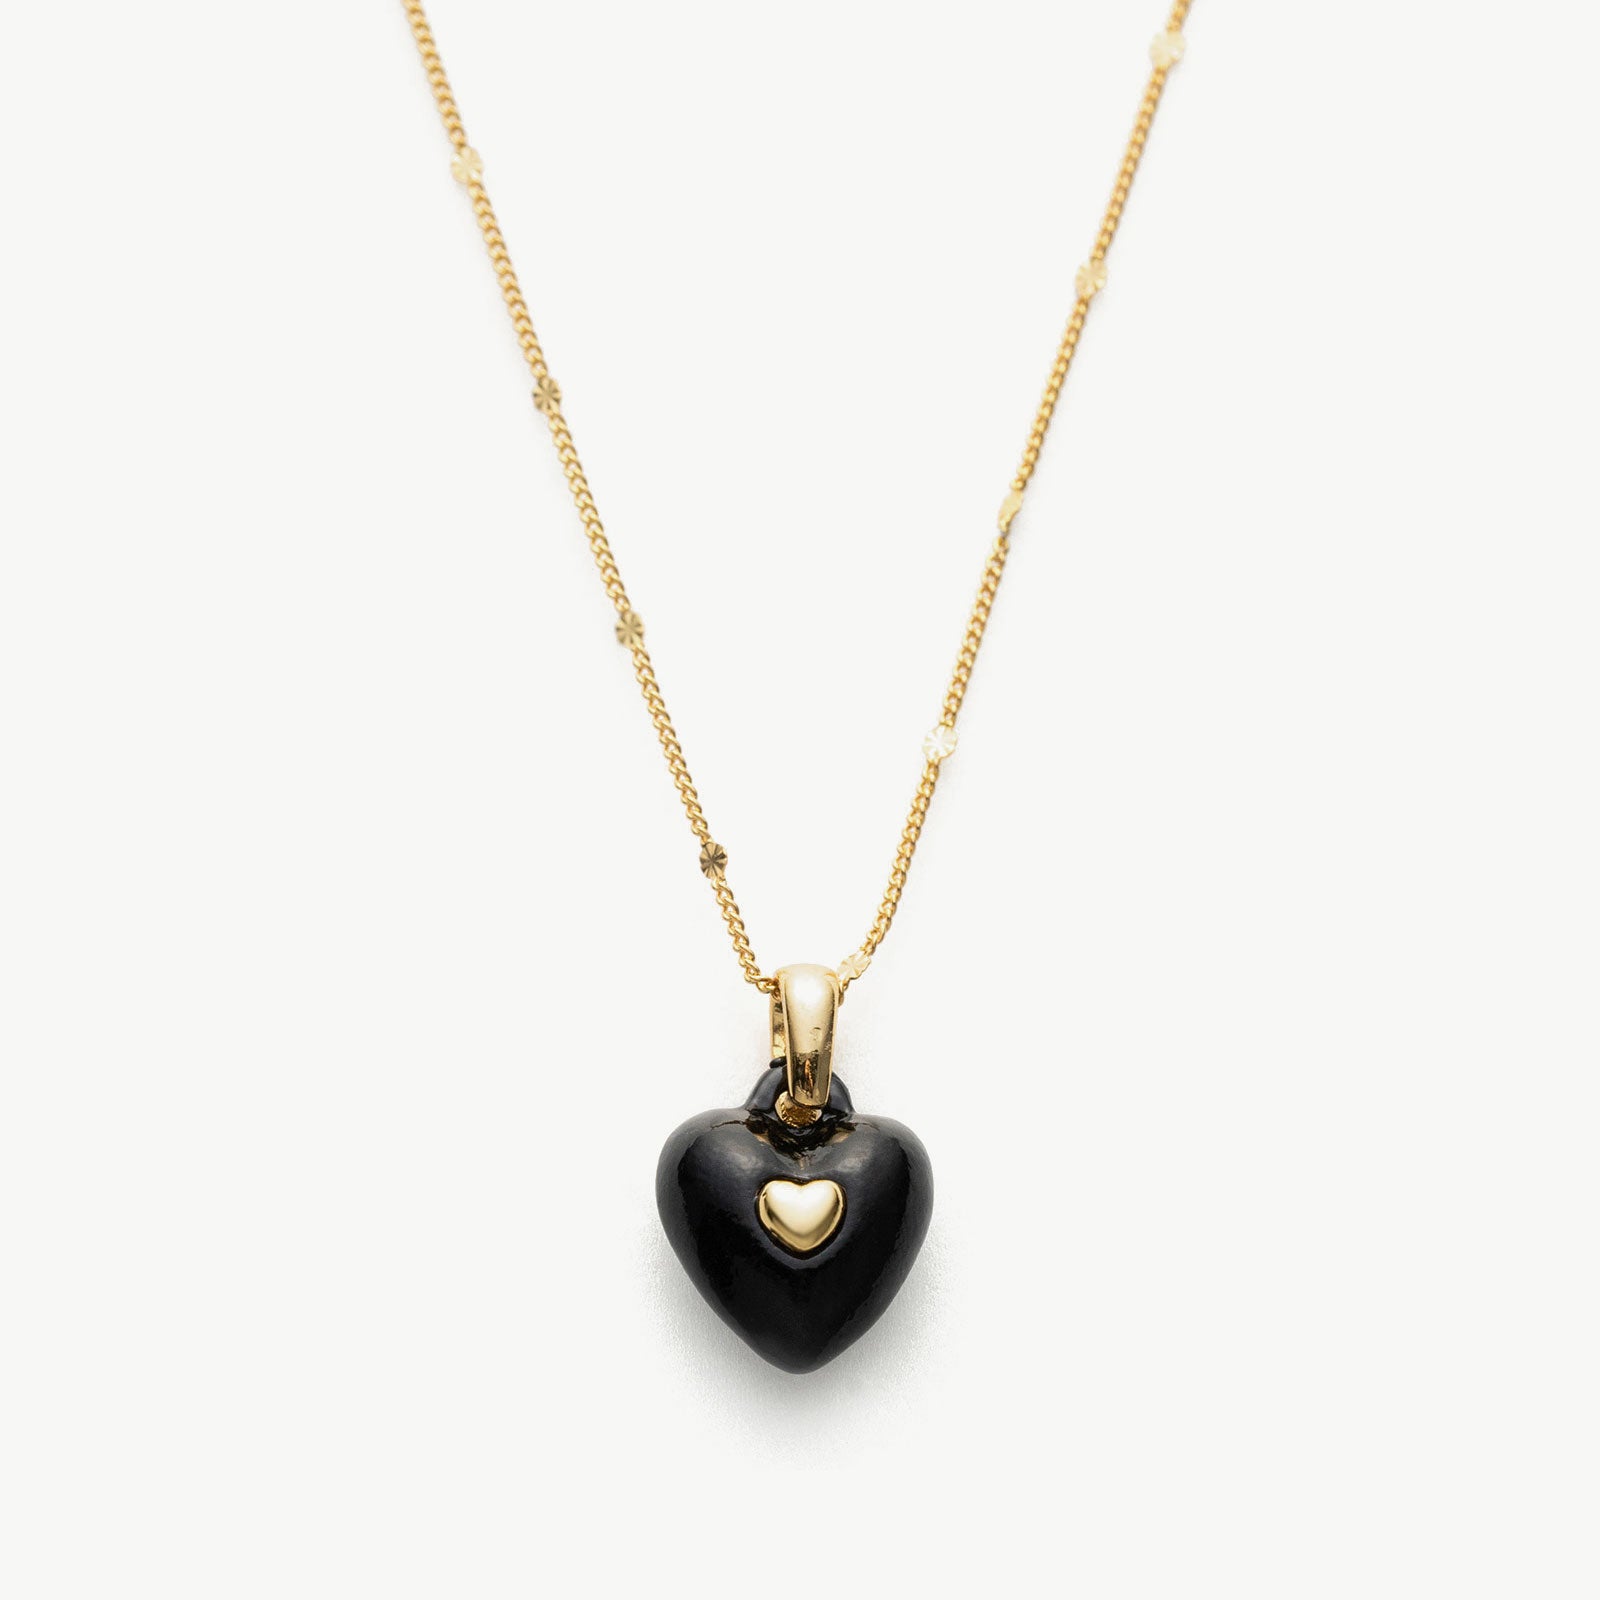 Onyx Heart Pendant Necklace, a timeless piece featuring a heart-shaped onyx pendant in classic black, adding a touch of elegance and sophistication to your necklin